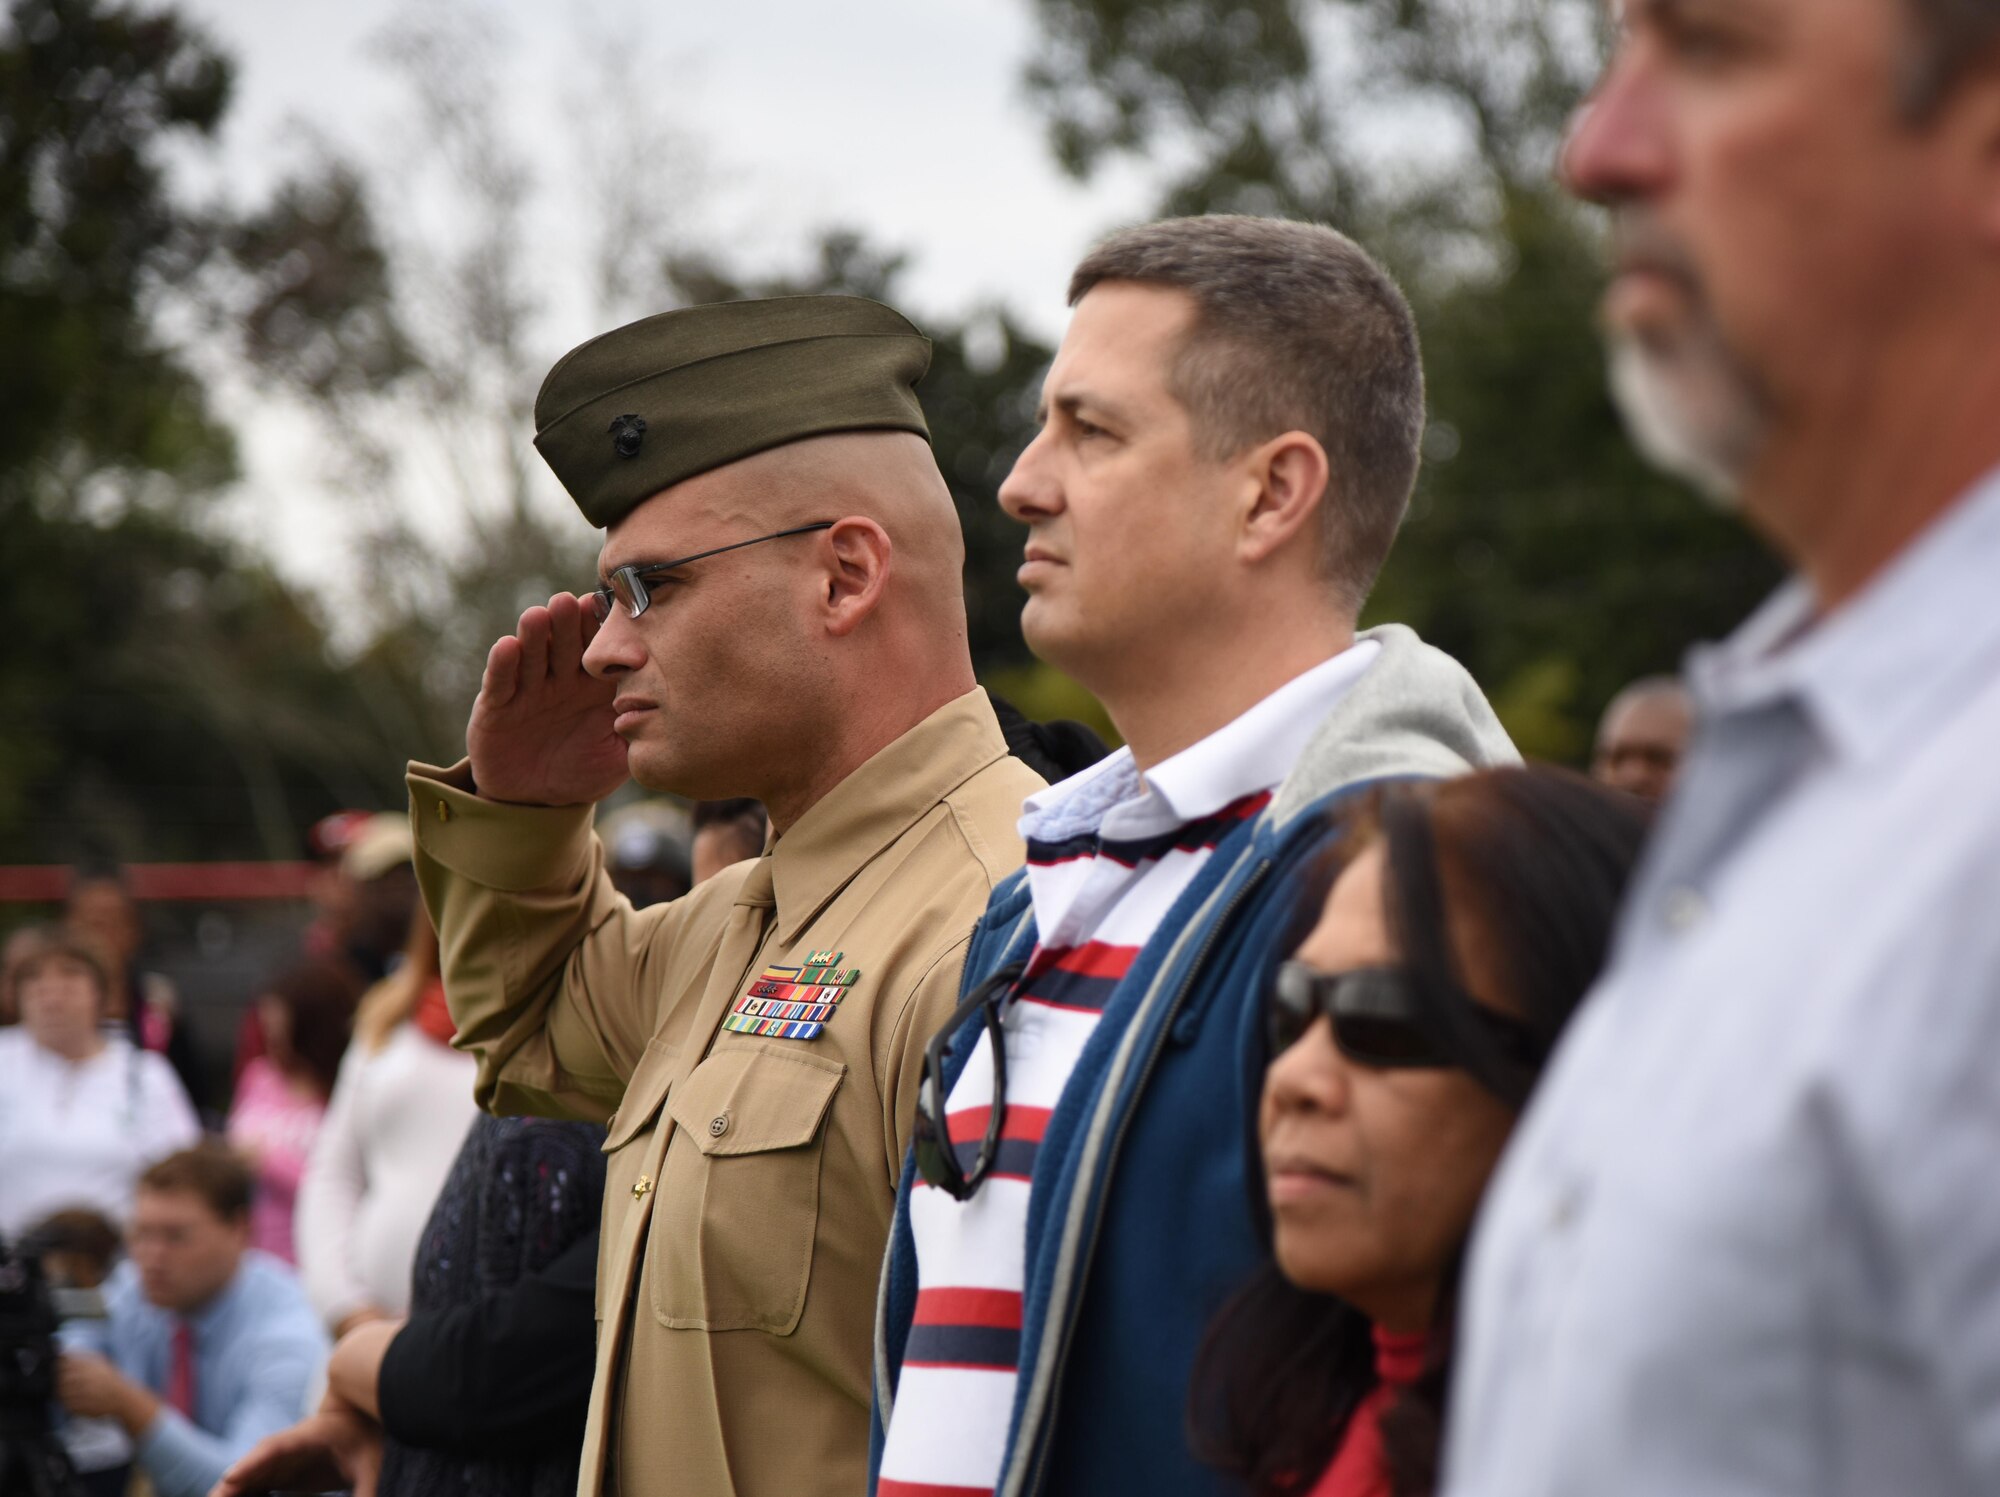 U.S. Marine Gunnery Sgt. Robert Abbott III, Keesler Marine Detachment general calibration aviation mechanic school senior NCO in charge, renders a salute as the U.S. flag is posted during a Jeff Davis Elementary School Veterans Day Celebration Nov. 11, 2016, in Biloxi, Miss. During the event, students delivered the Pledge of Allegiance and sang several patriotic songs. Keesler Air Force Base leadership, Honor Guard Airmen and personnel attended the event. (U.S. Air Force photo by Kemberly Groue/Released)